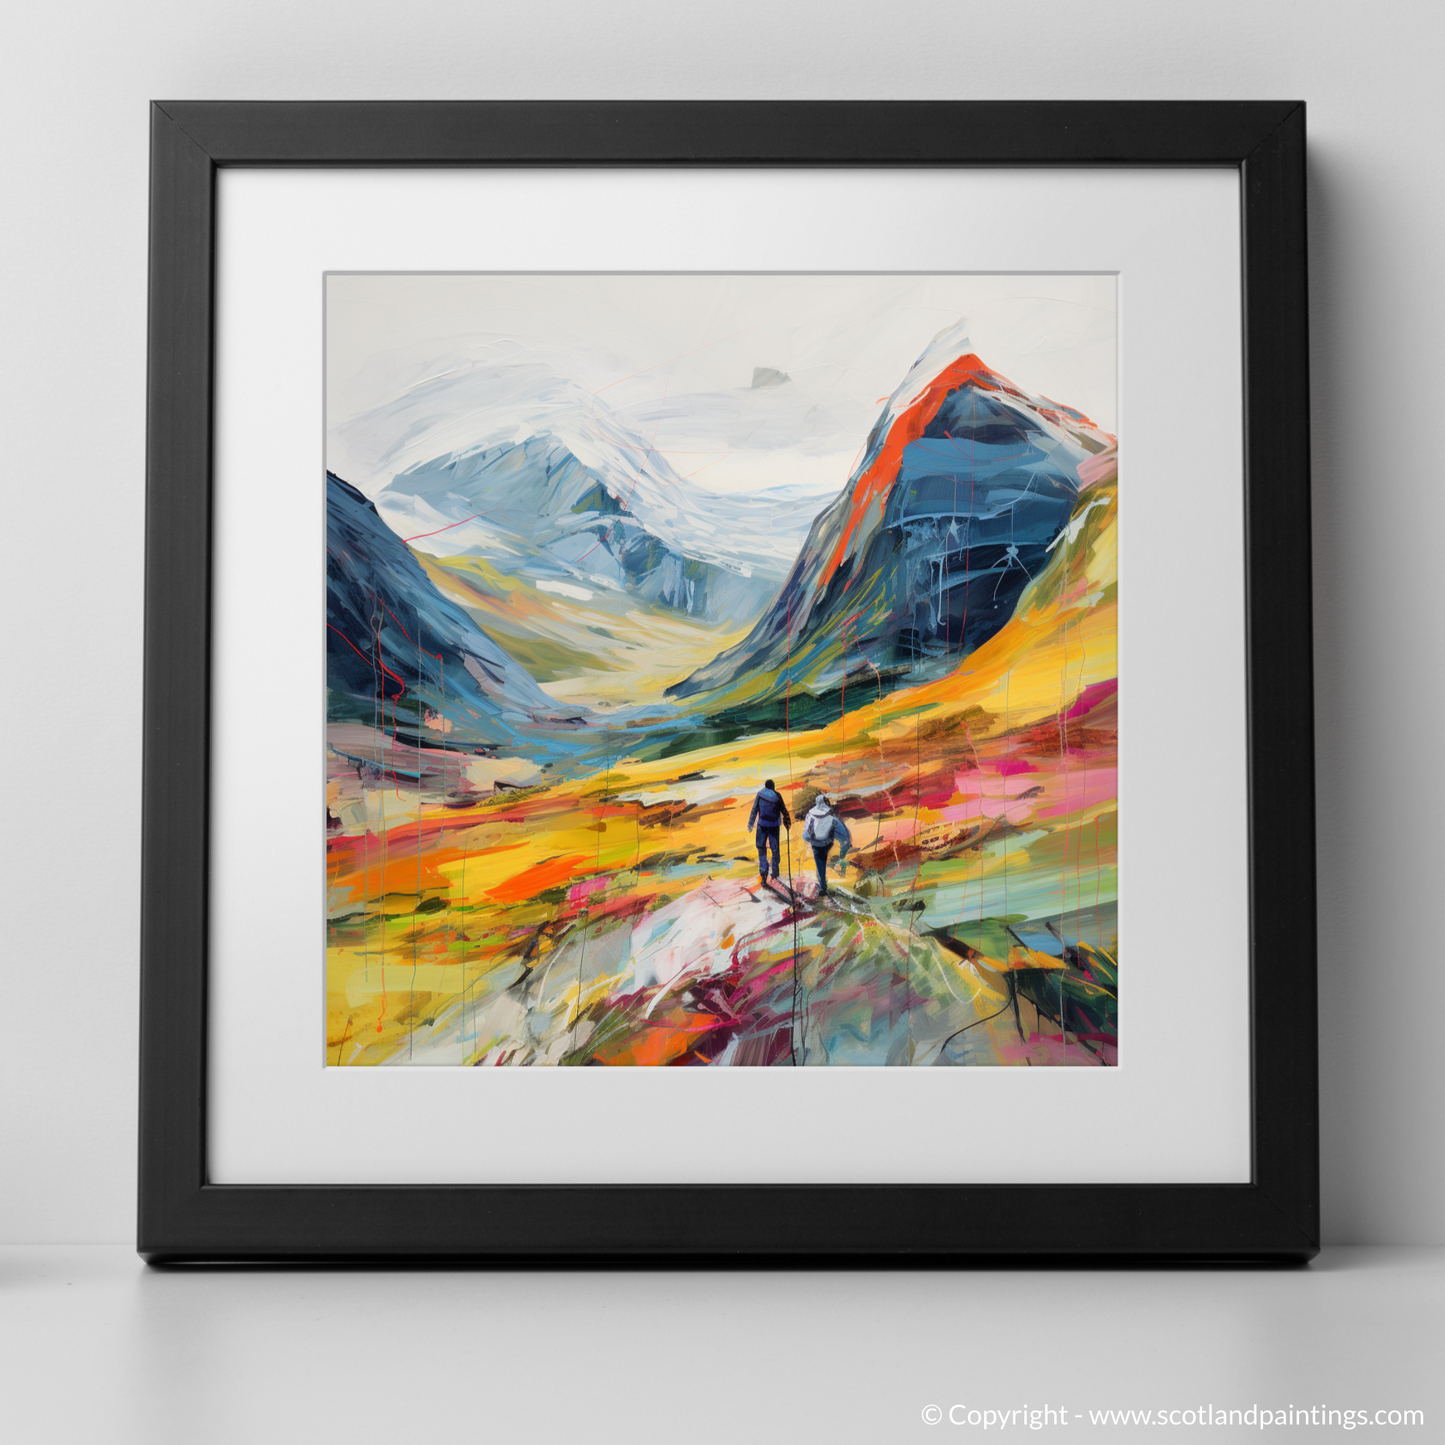 Painting and Art Print of Hikers in Glencoe. Hikers' Odyssey through the Vibrant Glencoe Highlands.